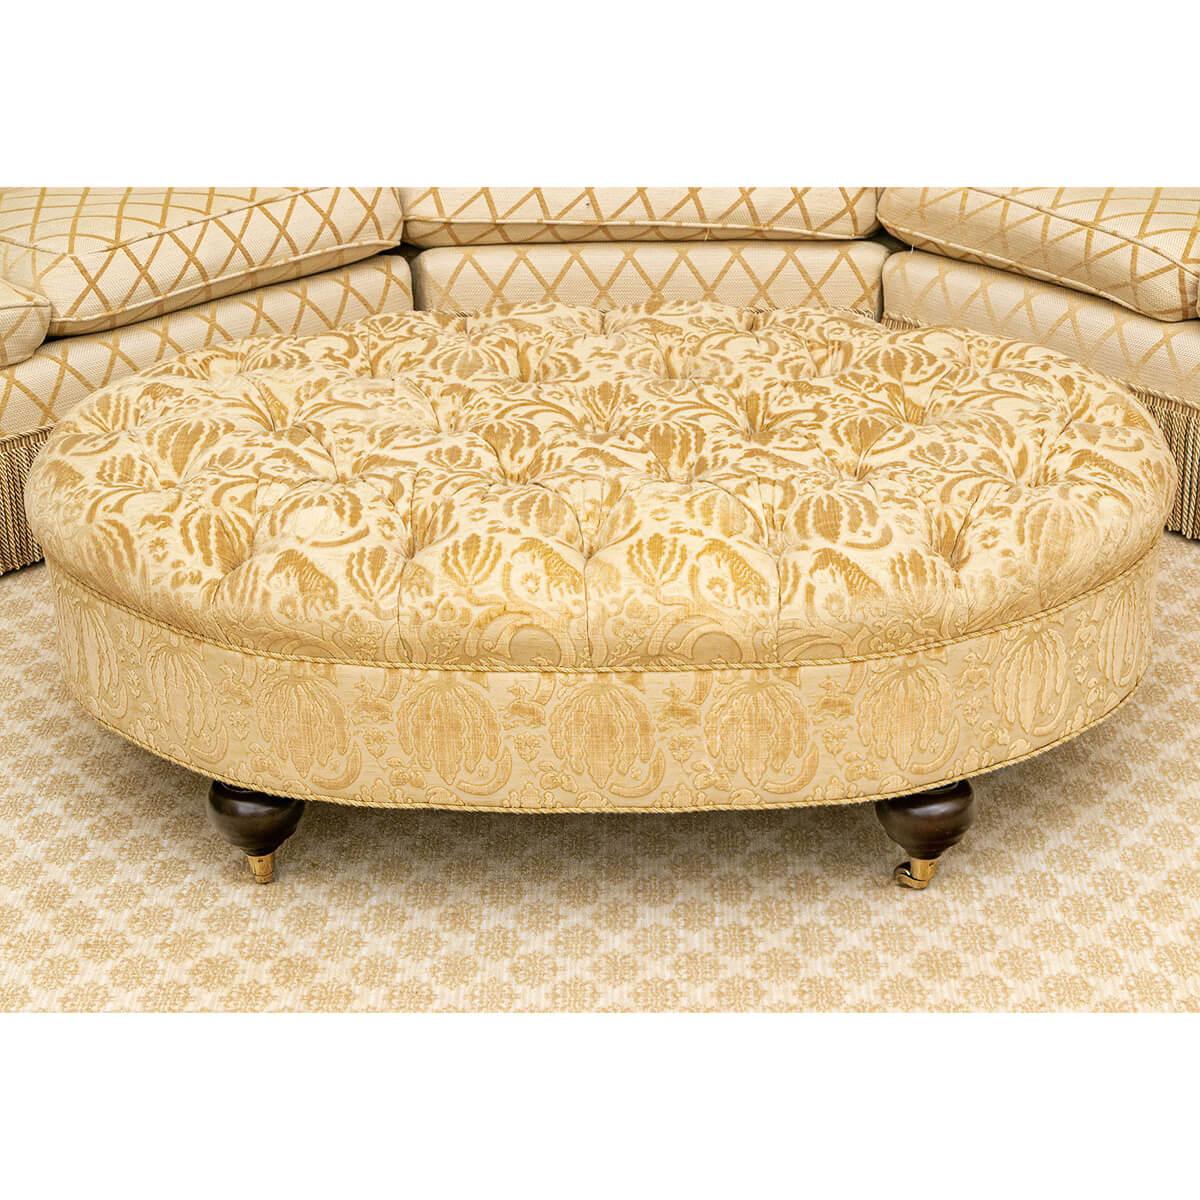 Contemporary Large Oval Ottoman